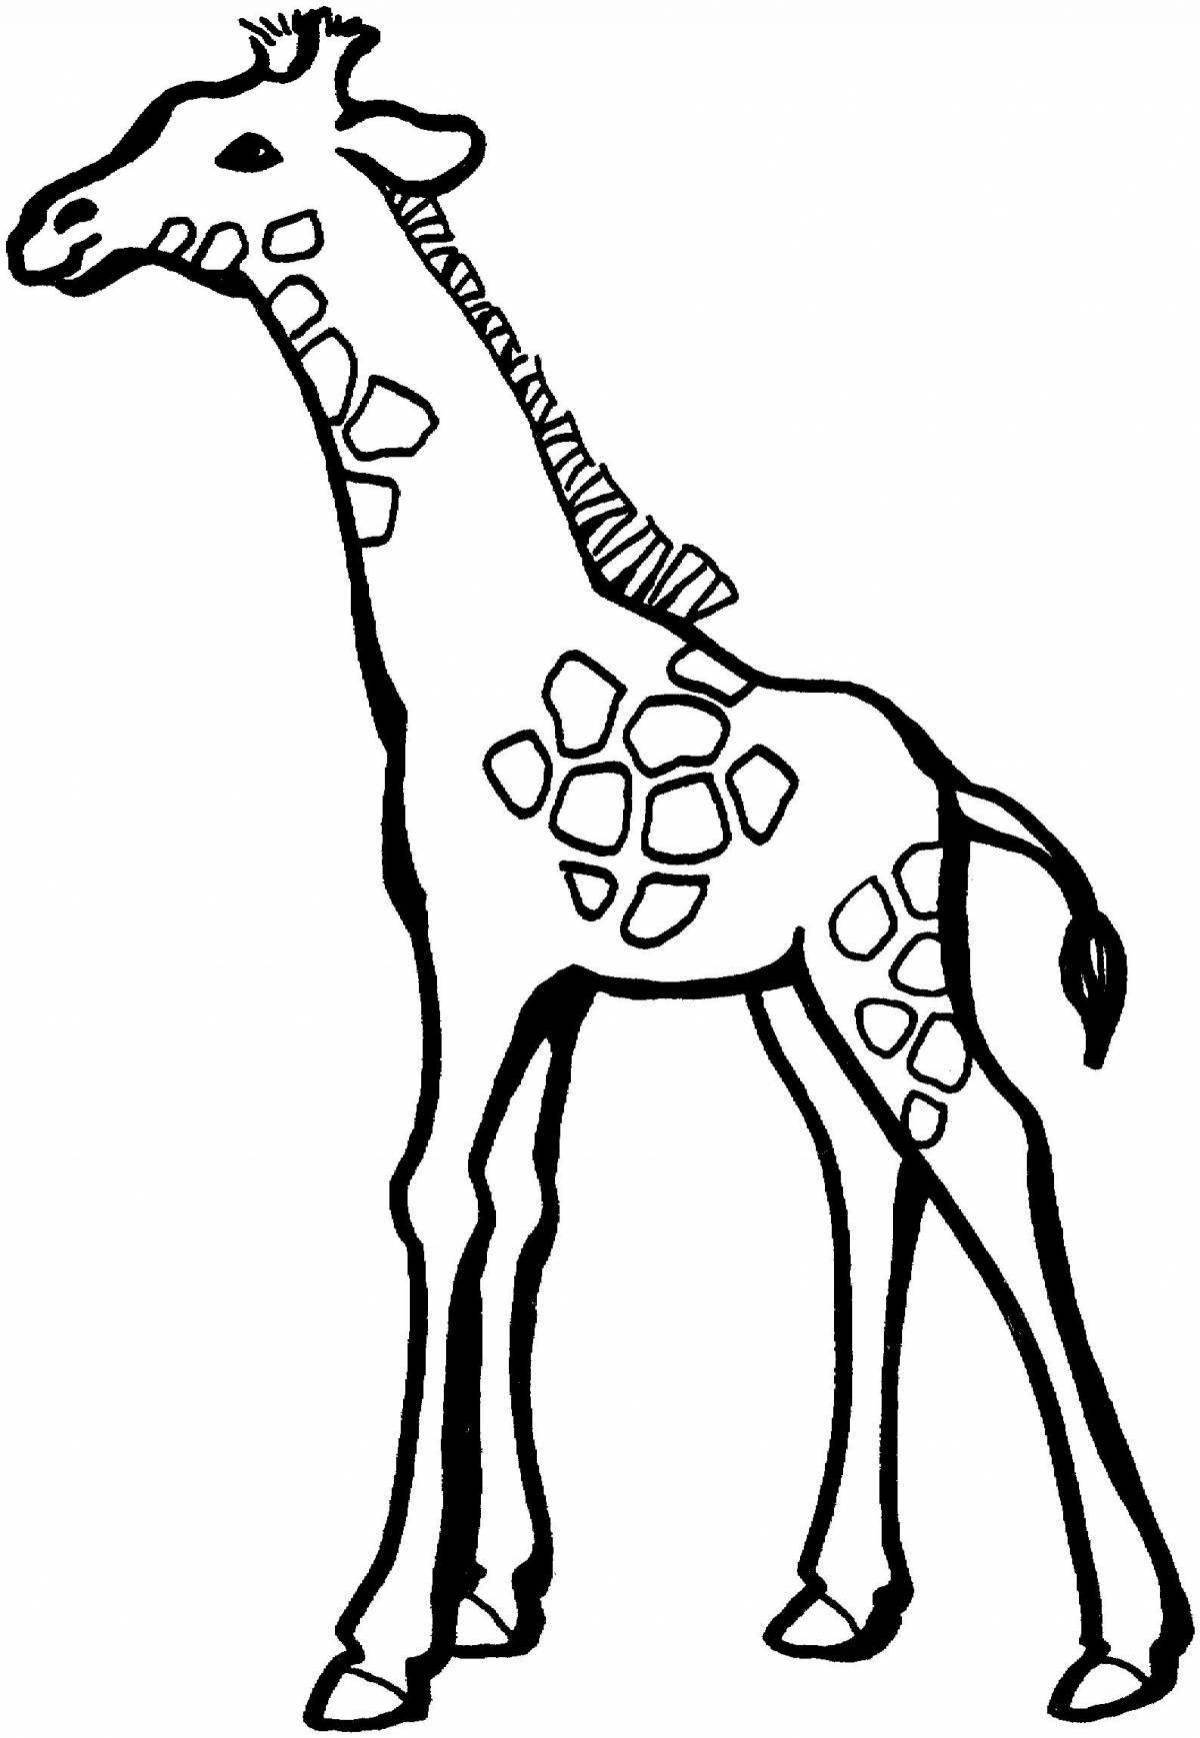 A fun giraffe coloring book for 3-4 year olds